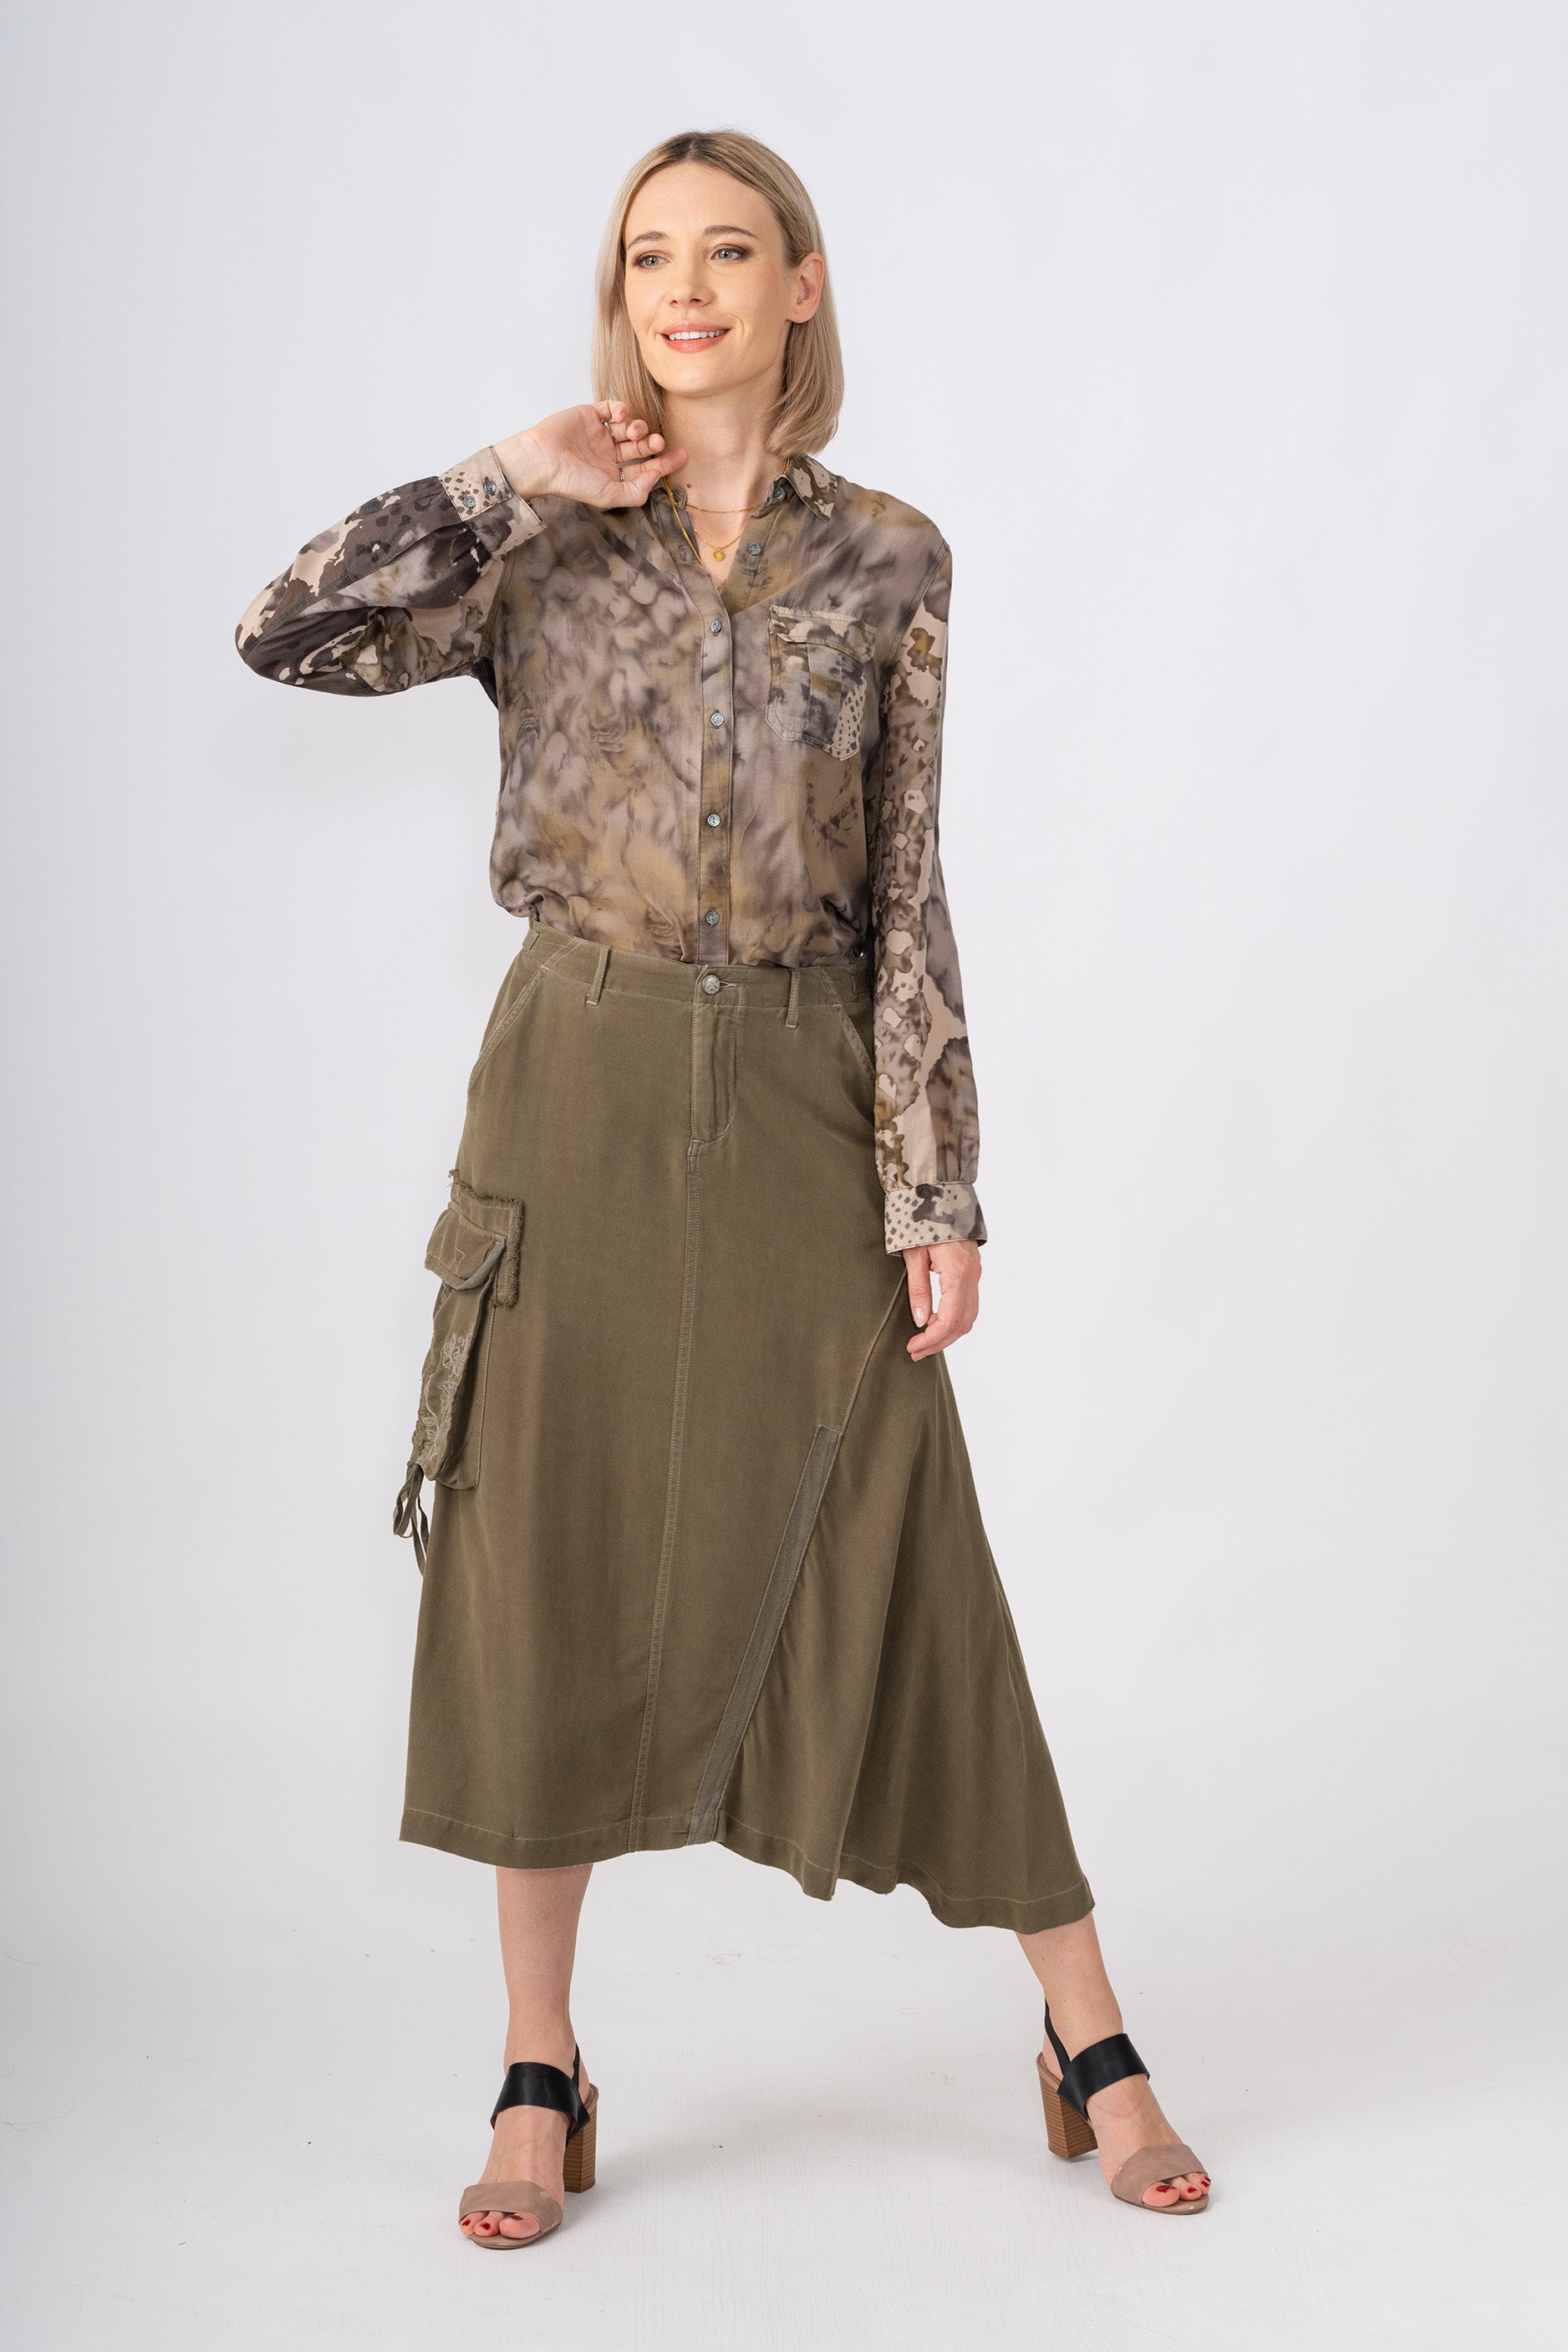 100% Silk asymmetric cargo skirt with embroidery in Olive